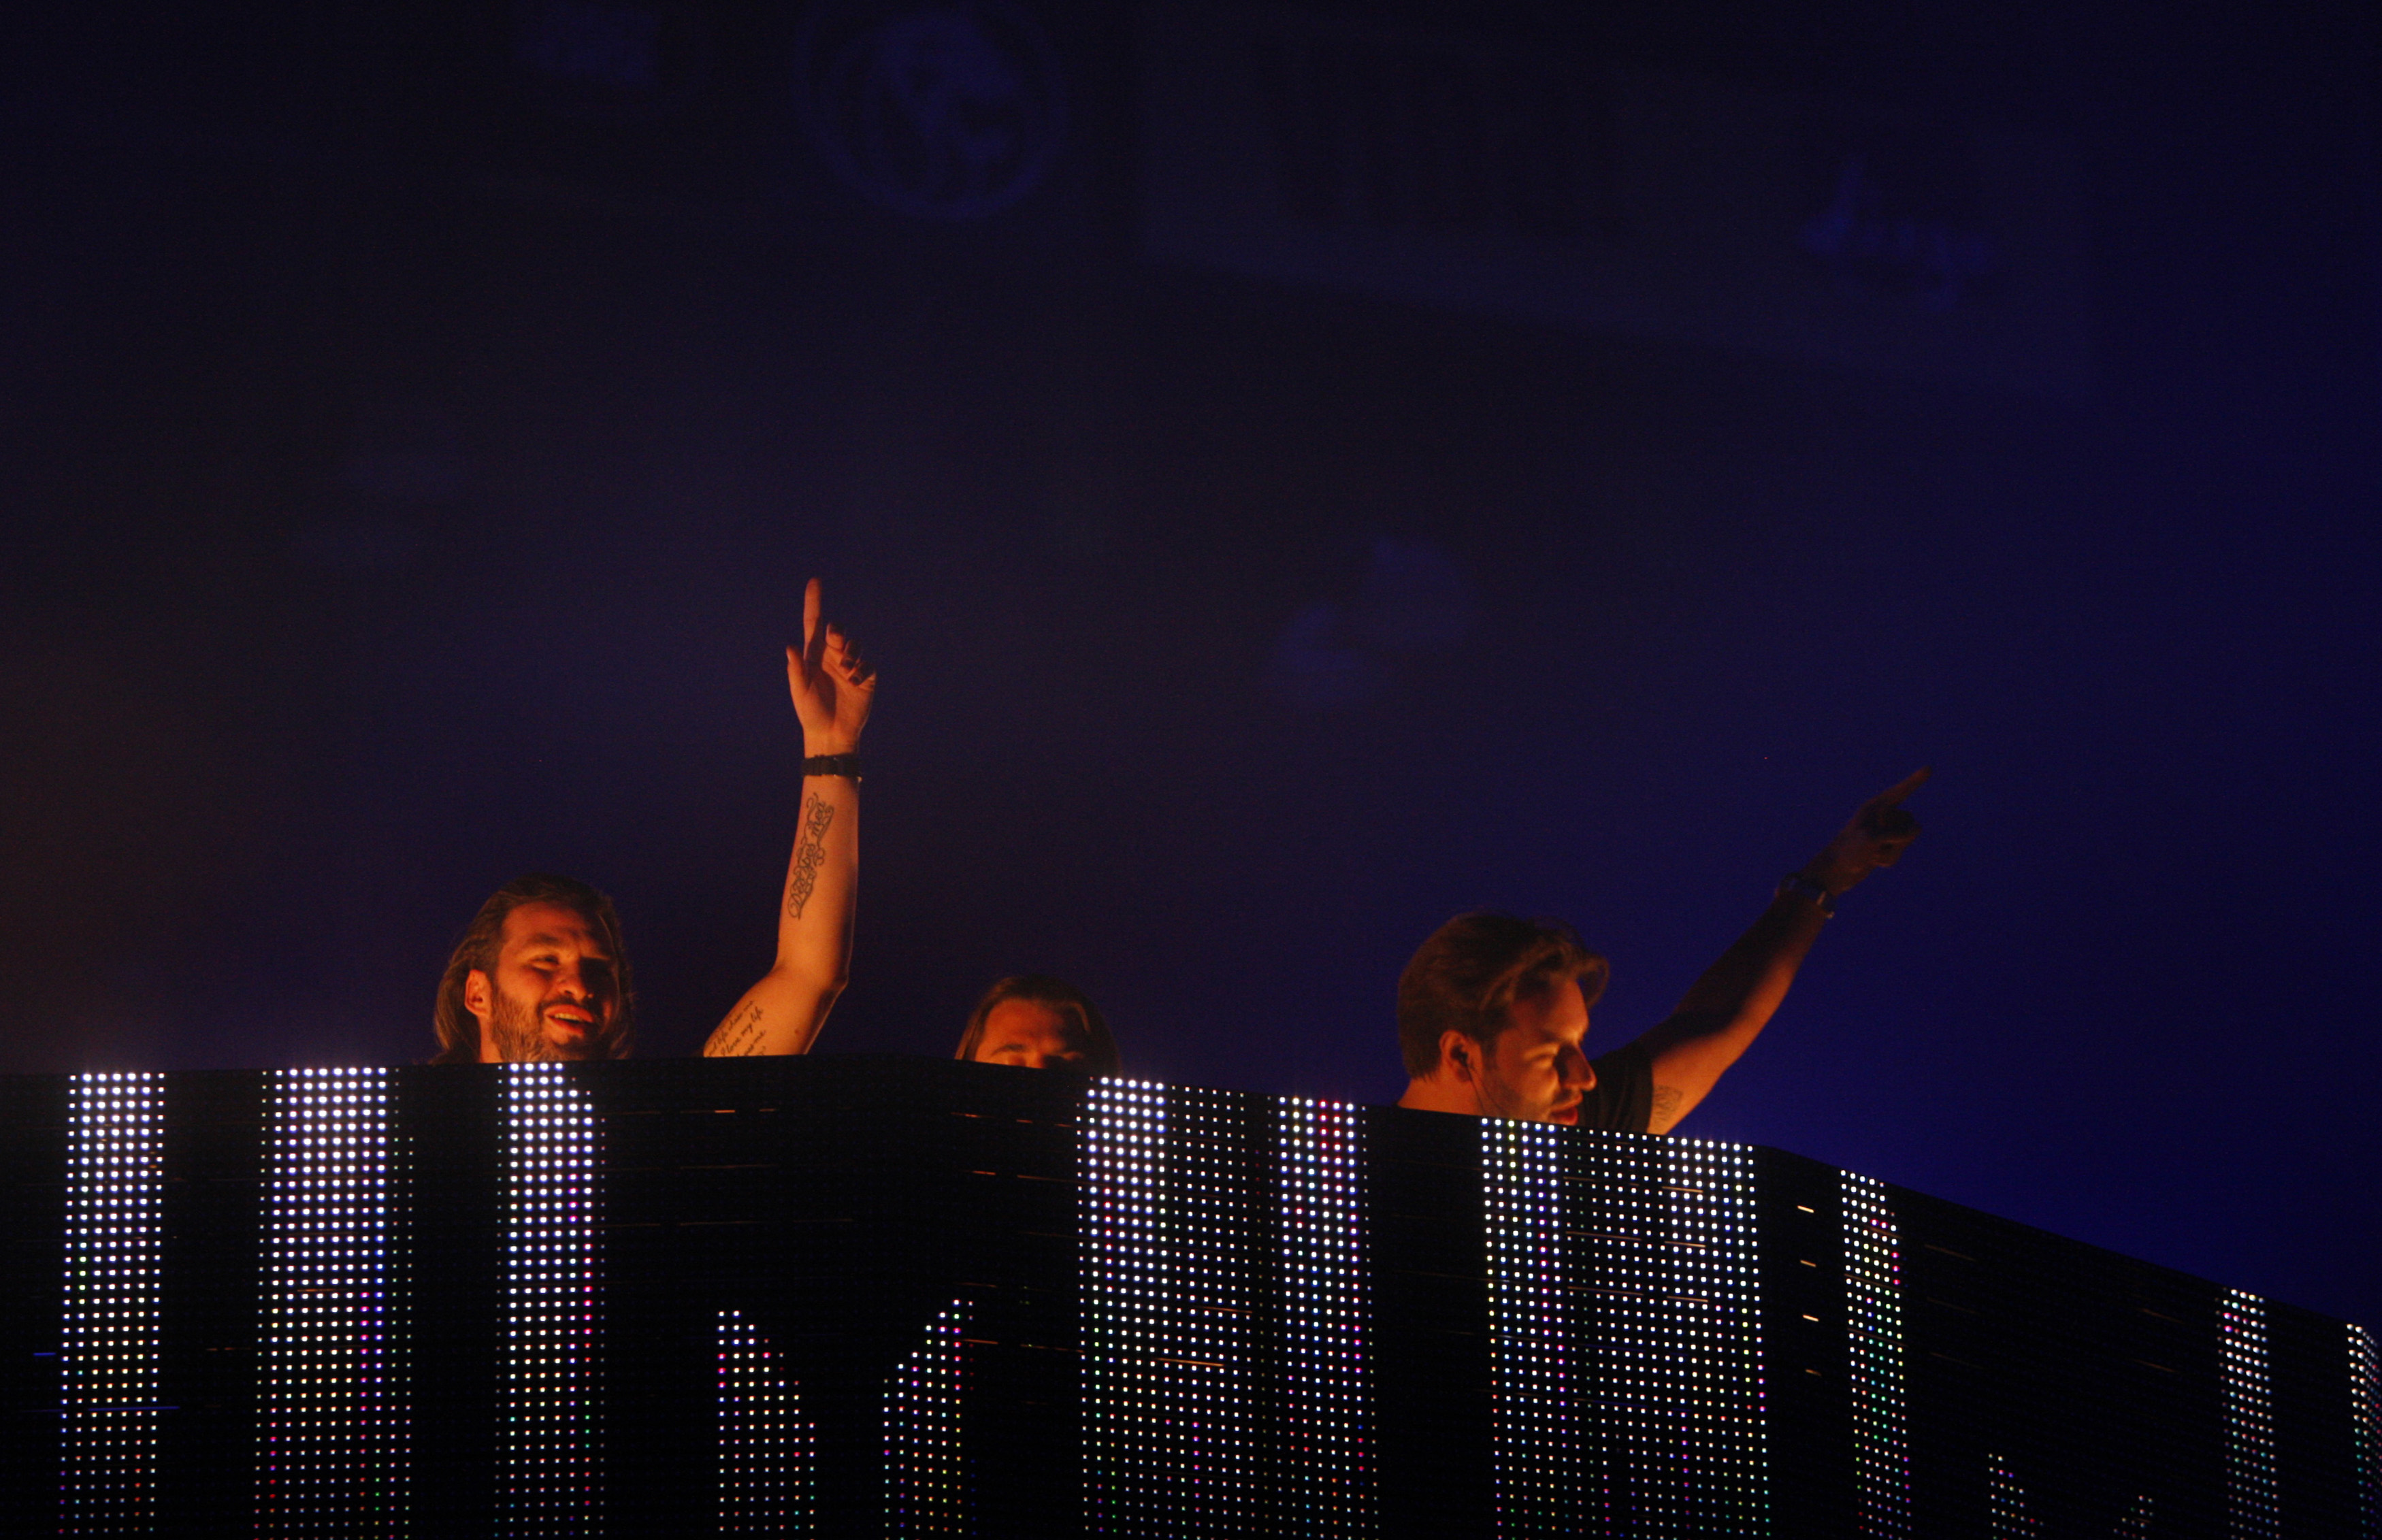 Members of Swedish House Mafia perform during the 2012 iHeartRadio Music Festival in Las Vegas